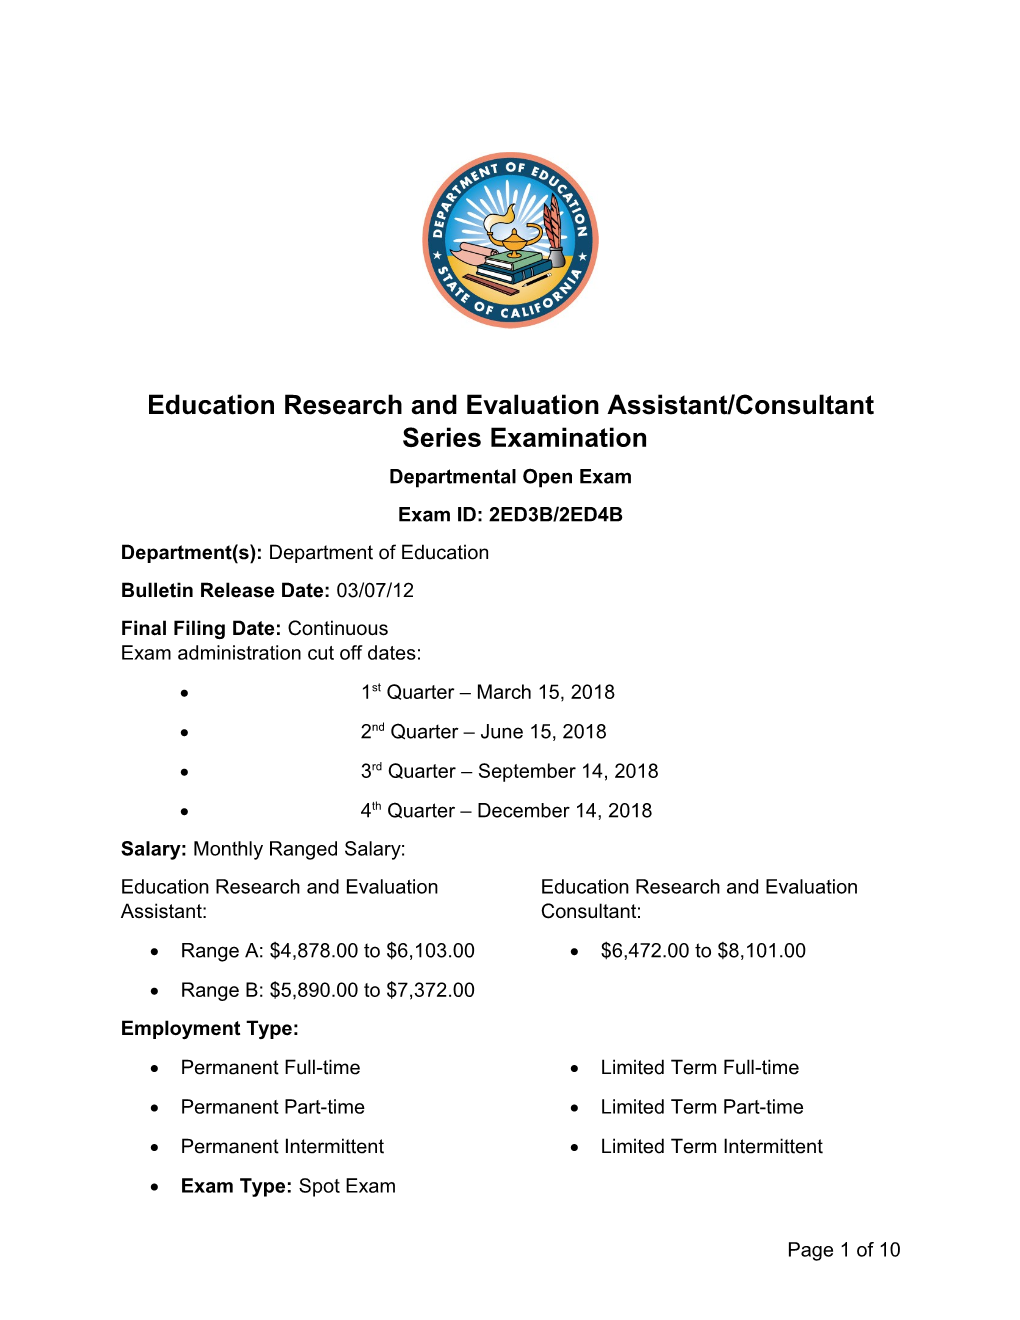 Ed Research & Eval Asst./Cons - Jobs at CDE (CA Dept of Education)